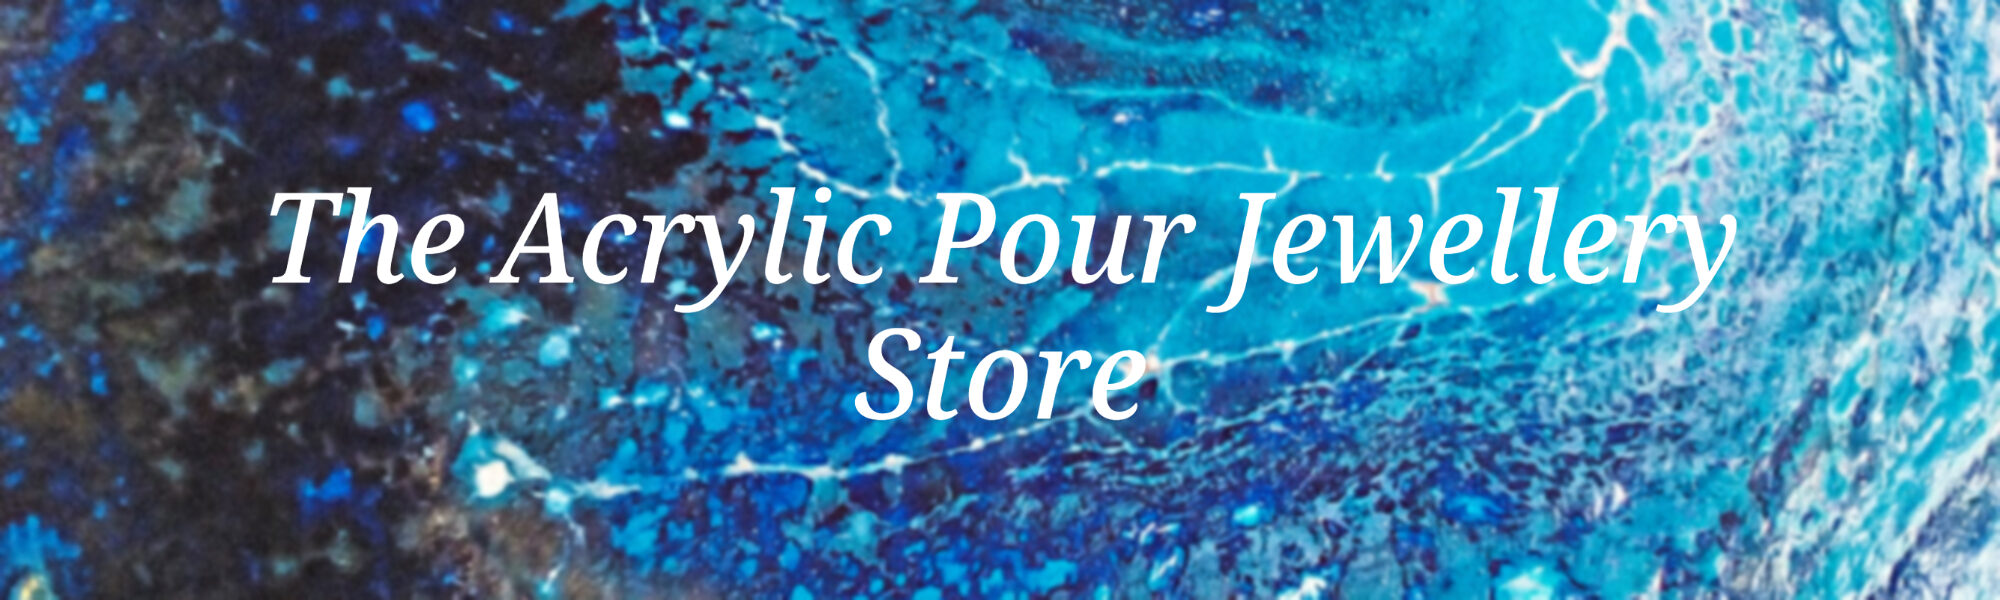 The Acrylic Pour Jewellery Store